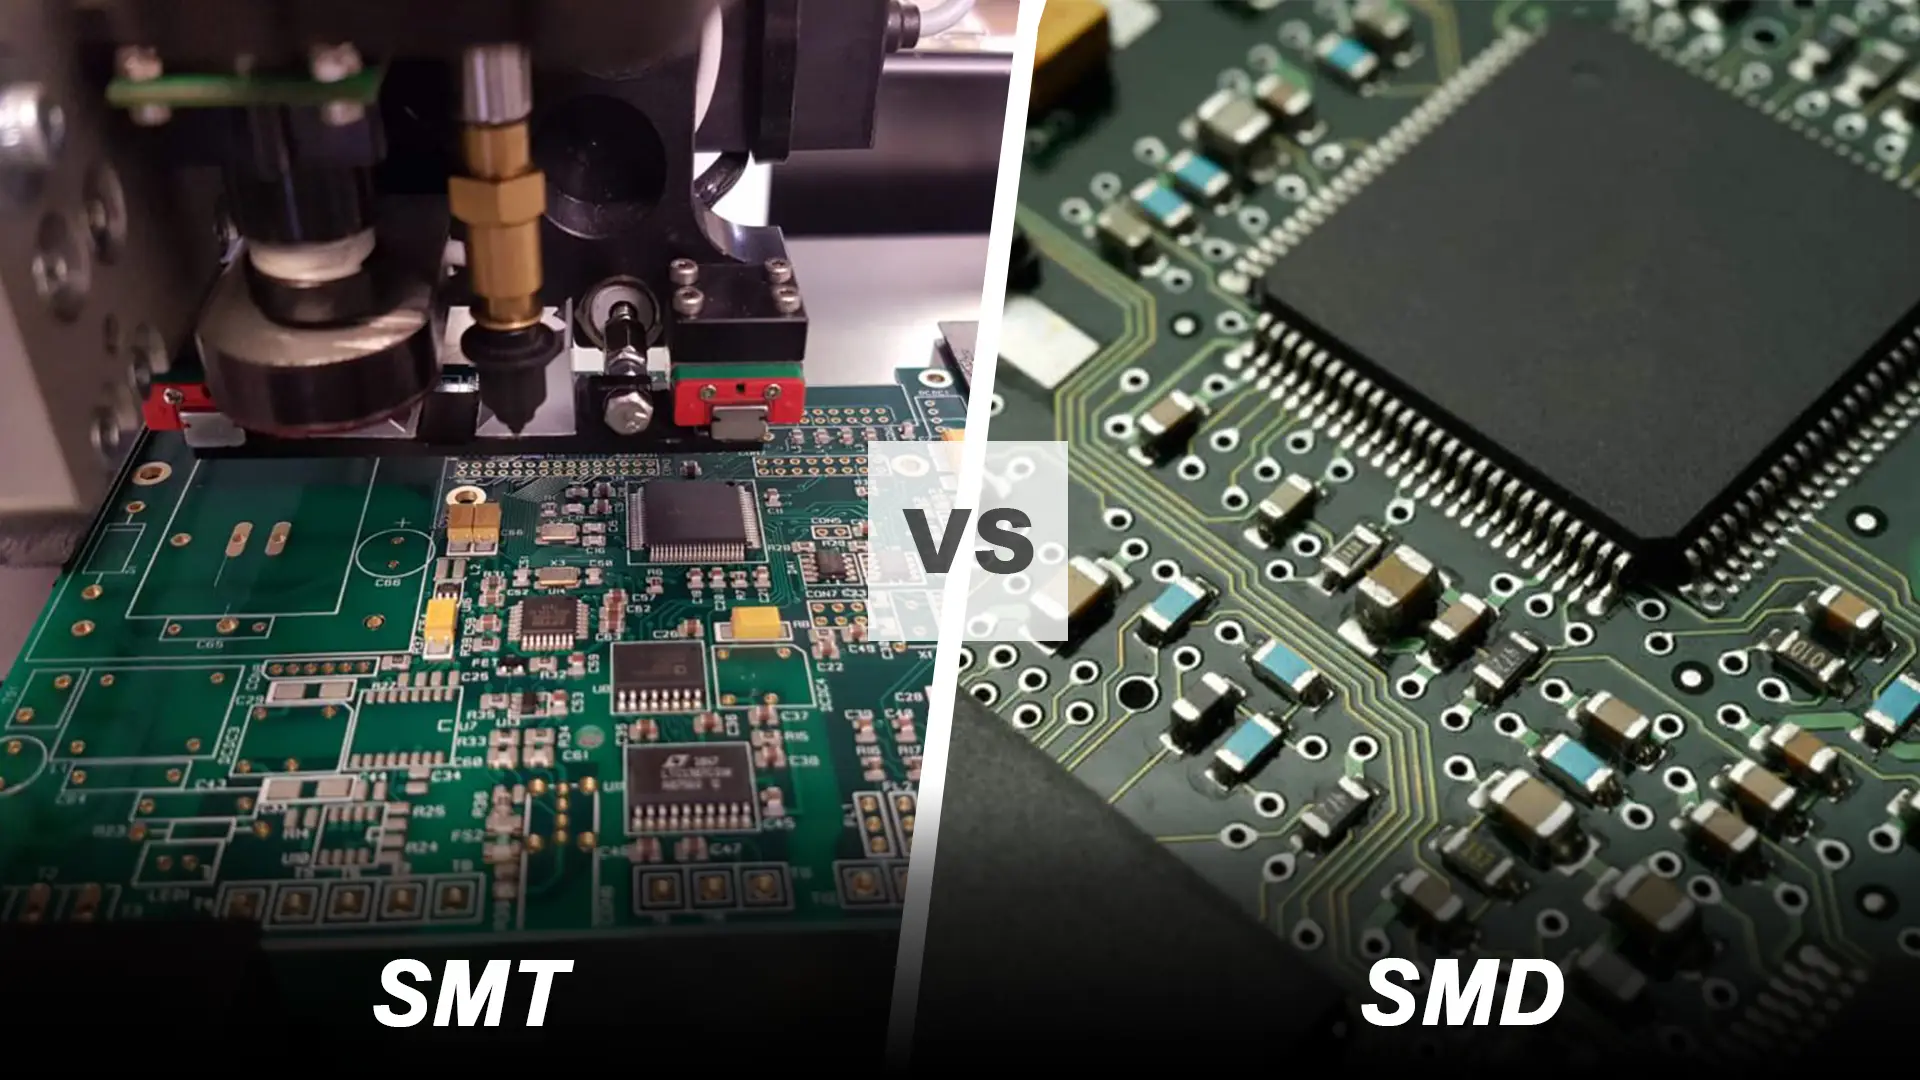 SMD vs SMT_ Clarifying Their Key Differences in Electronics Manufacturing